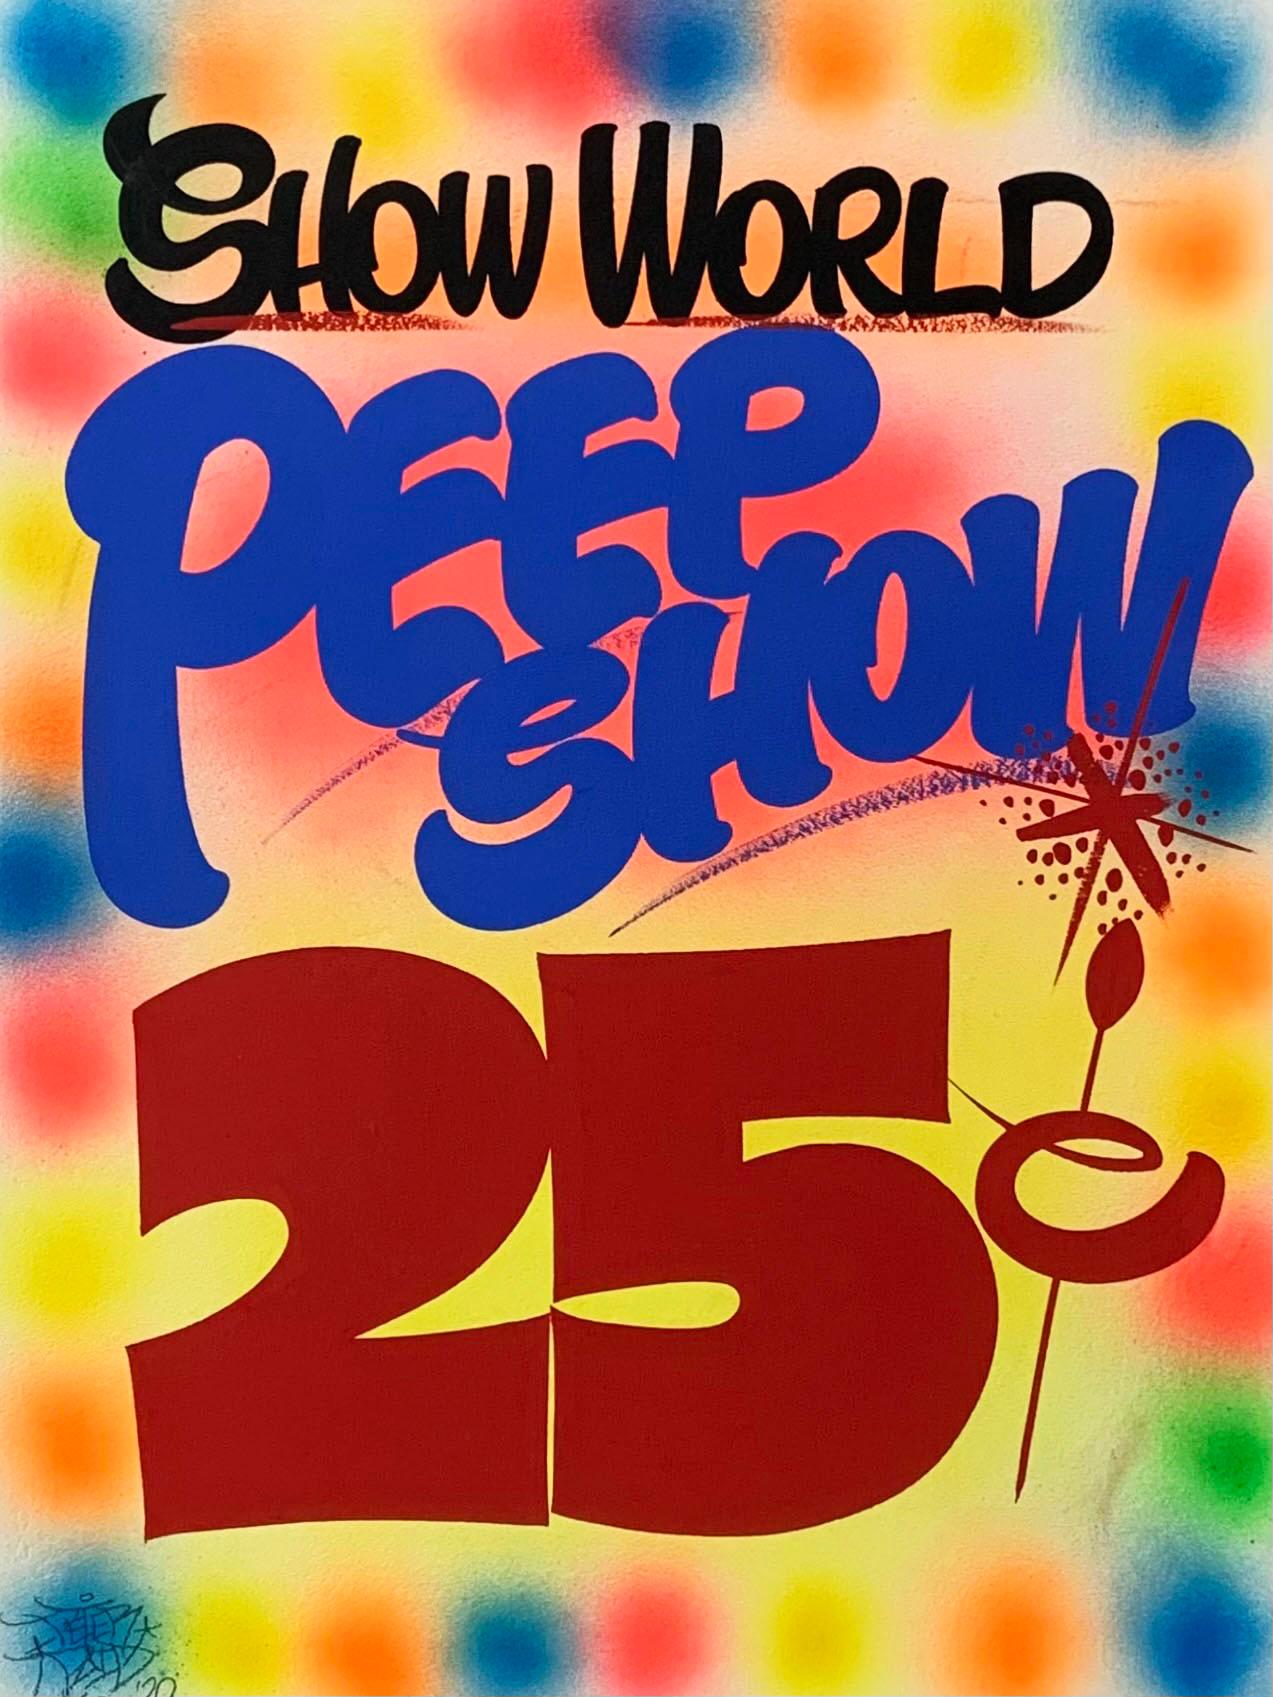 Peep Show - Painting by Paid